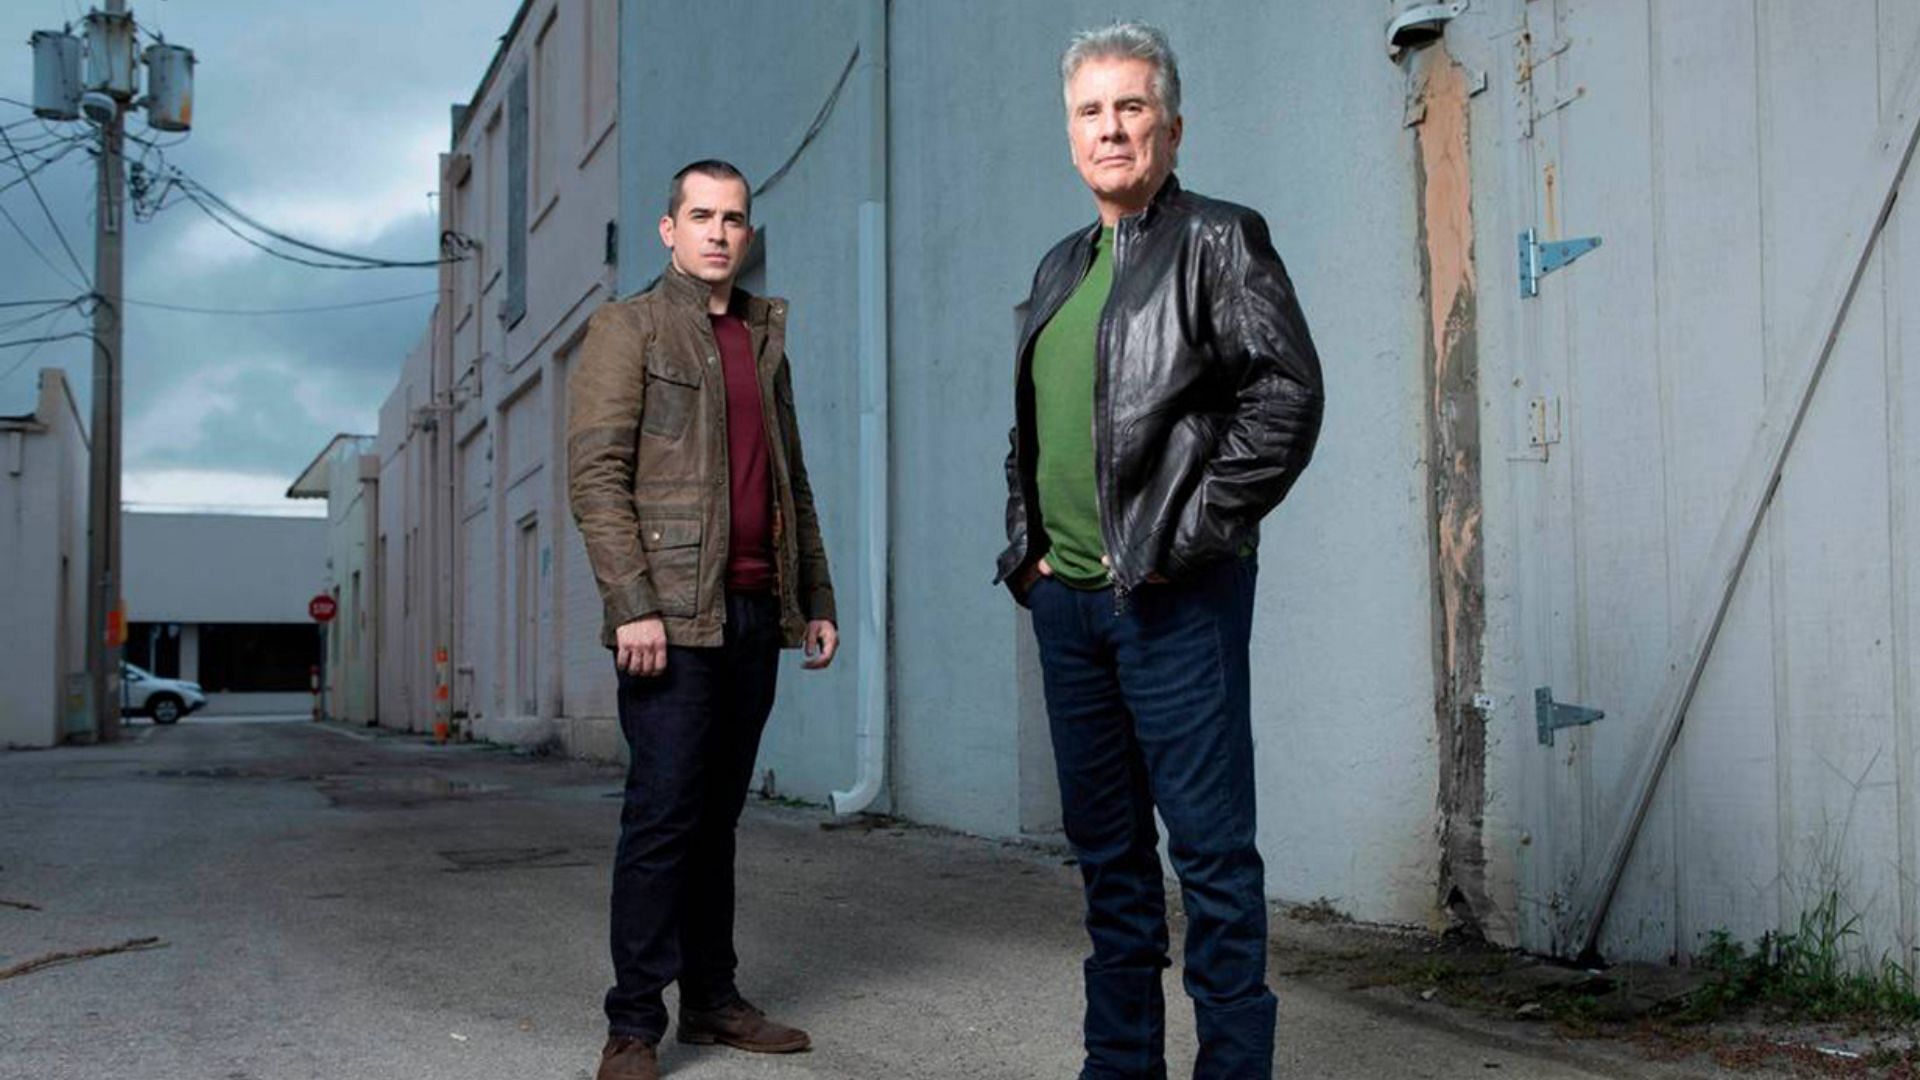 ID&#039;s In Pursuit with John Walsh, featuring his son Cal Walsh, will recount William Strand&#039;s narrative as the middle-aged man remains at large to date (Image via IMDb)